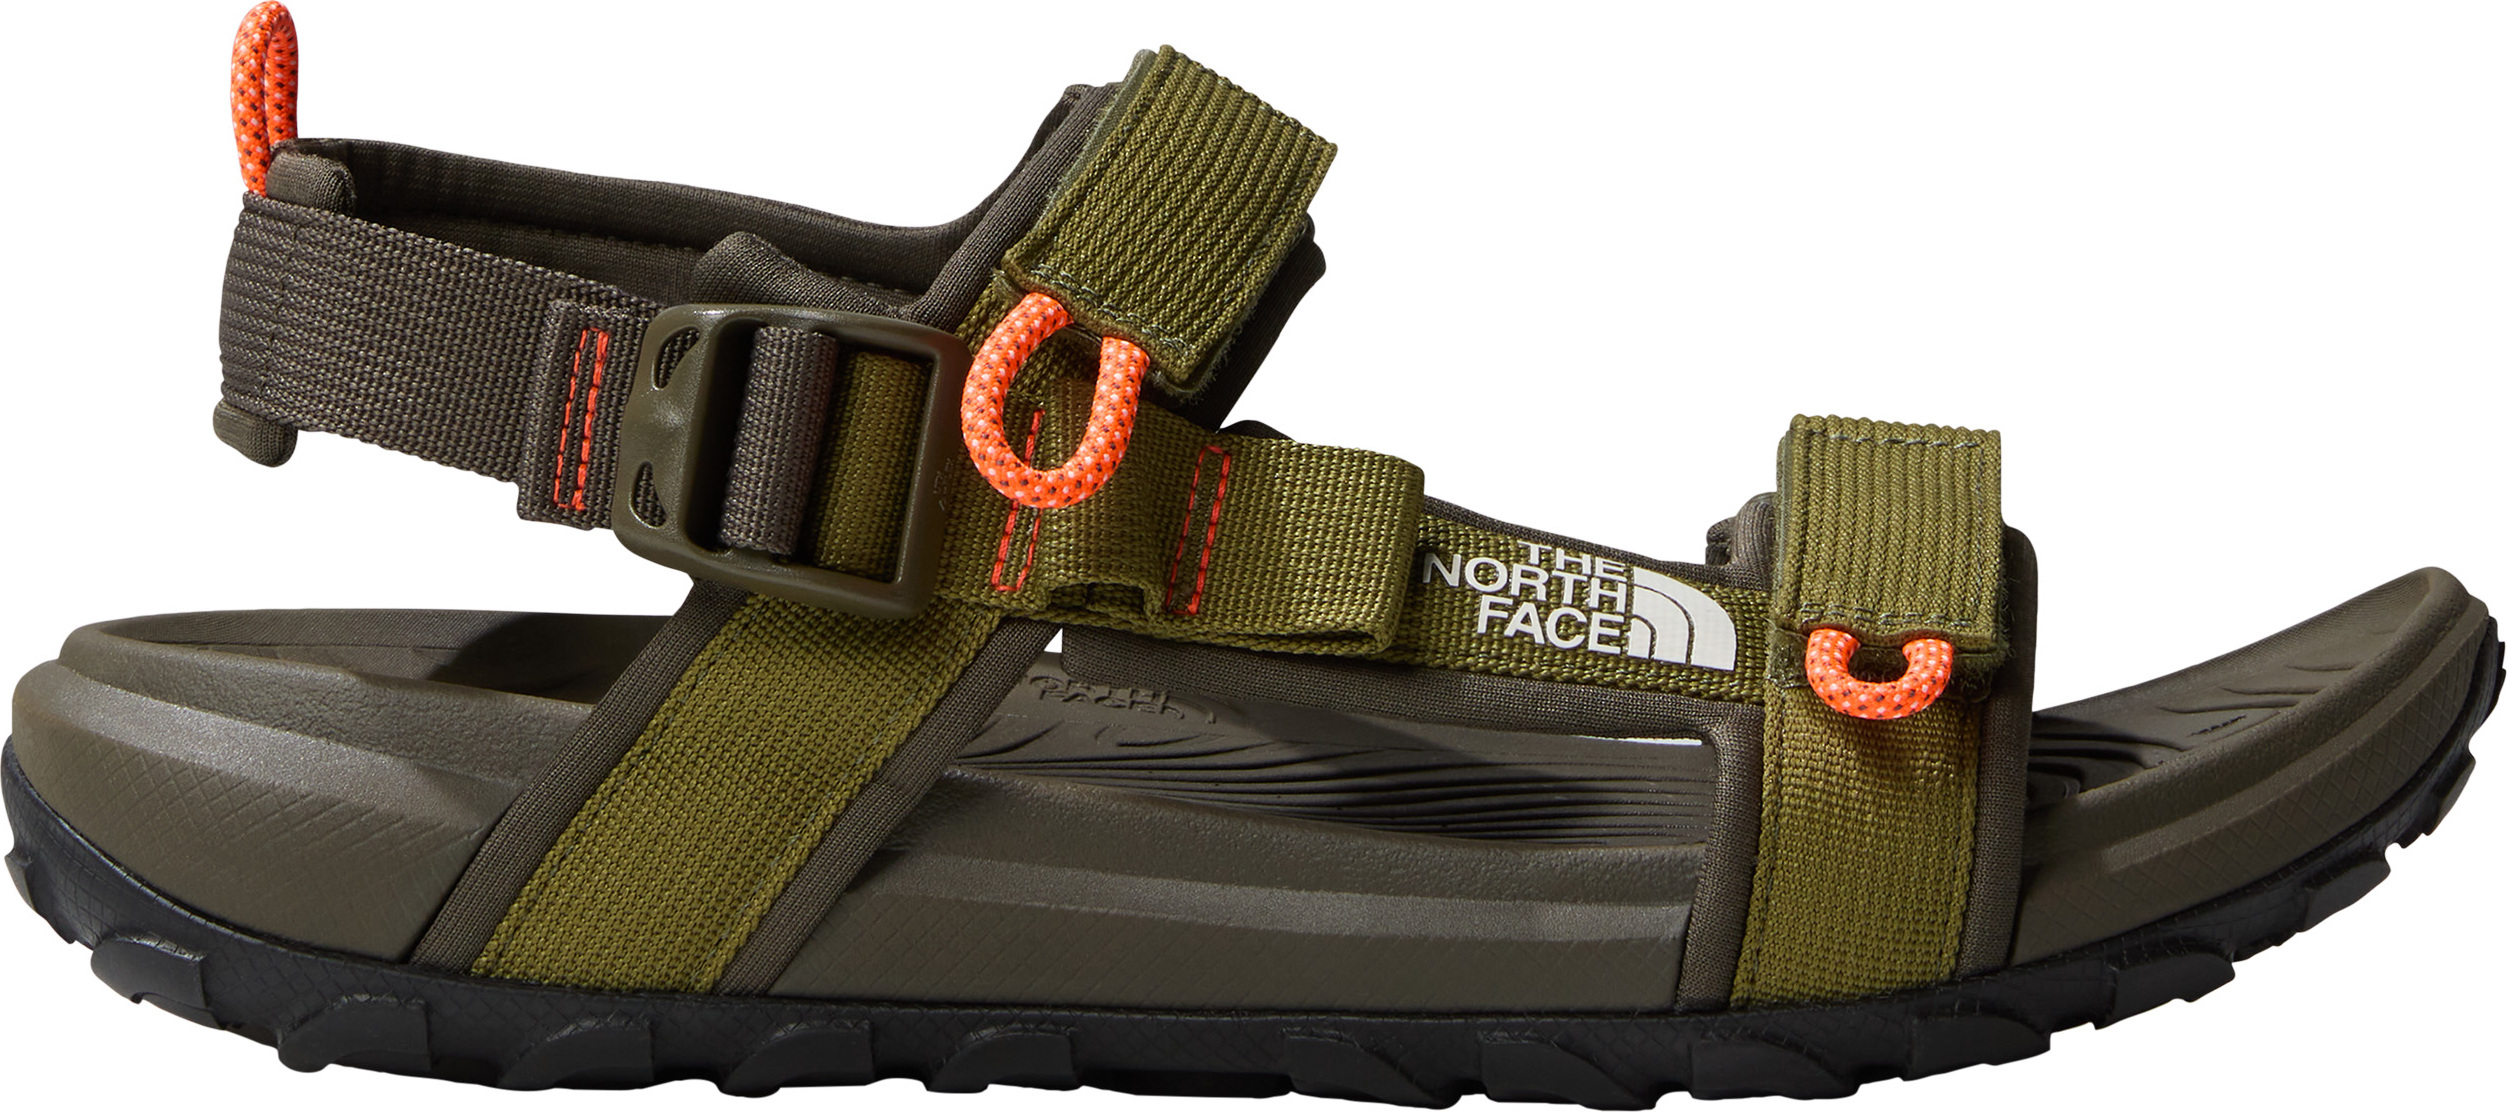 The North Face The North Face Men's Explore Camp Sandals Forest Olive/New Taupe 44.5, Forest Olive/New Taupe